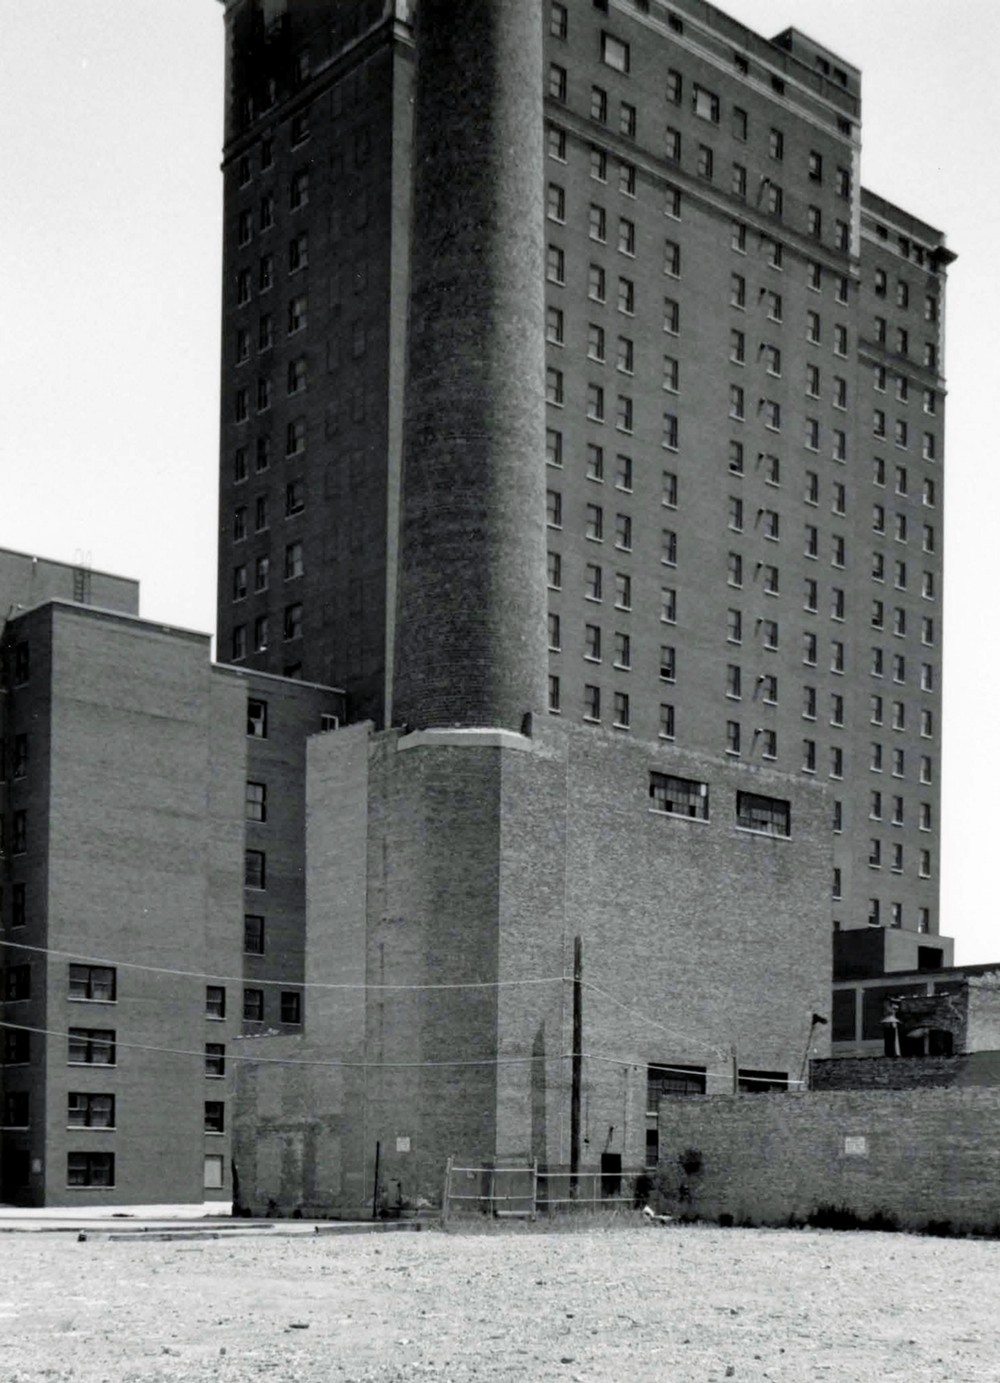 St. Luke's Hospital Complex, Chicago Illinois LOOKING SOUTH-EAST SHOWING THE BOILER HOUSE AND NORTH (SIDE) AND WEST (REAR) ELEVATIONS (1982)